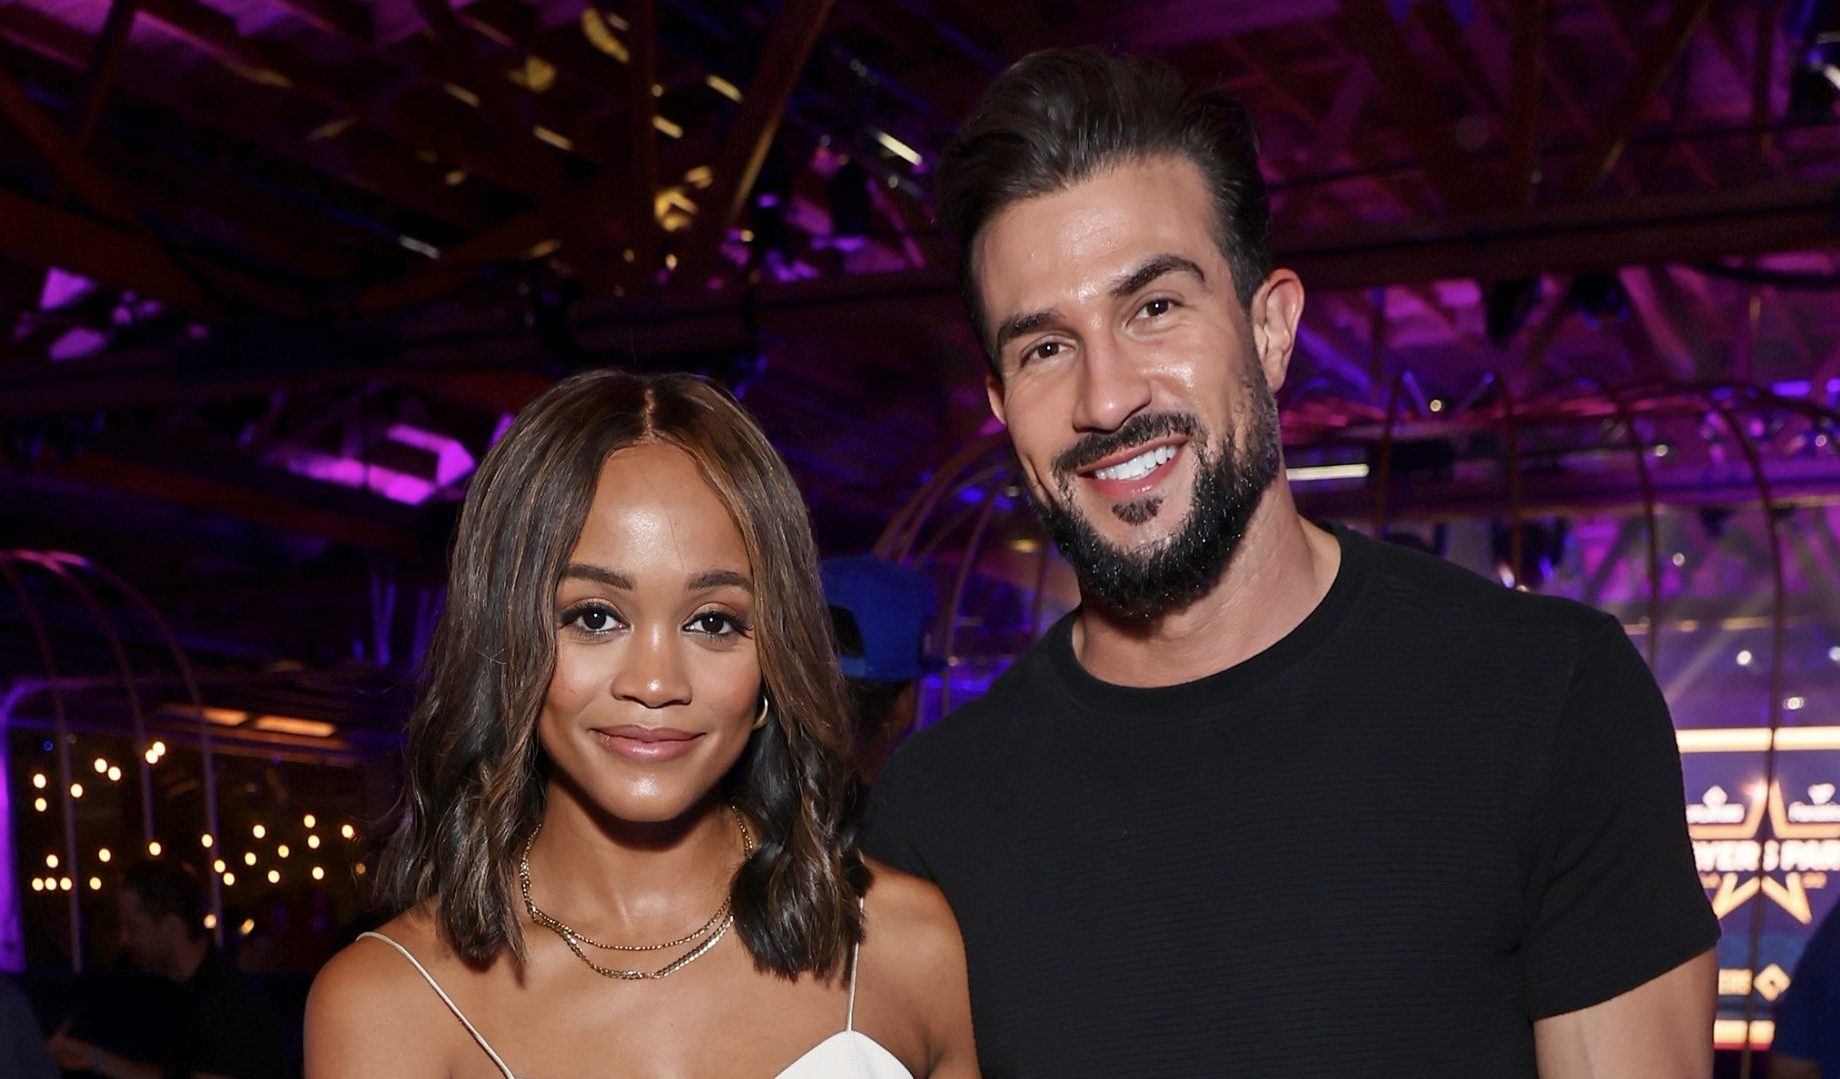 LOS ANGELES, CALIFORNIA - JULY 18: (L-R) Rachel Lindsay and Bryan Abasolo attend the MLBPA x Fanatics "Players Party" at City Market Social House on July 18, 2022 in Los Angeles, California.